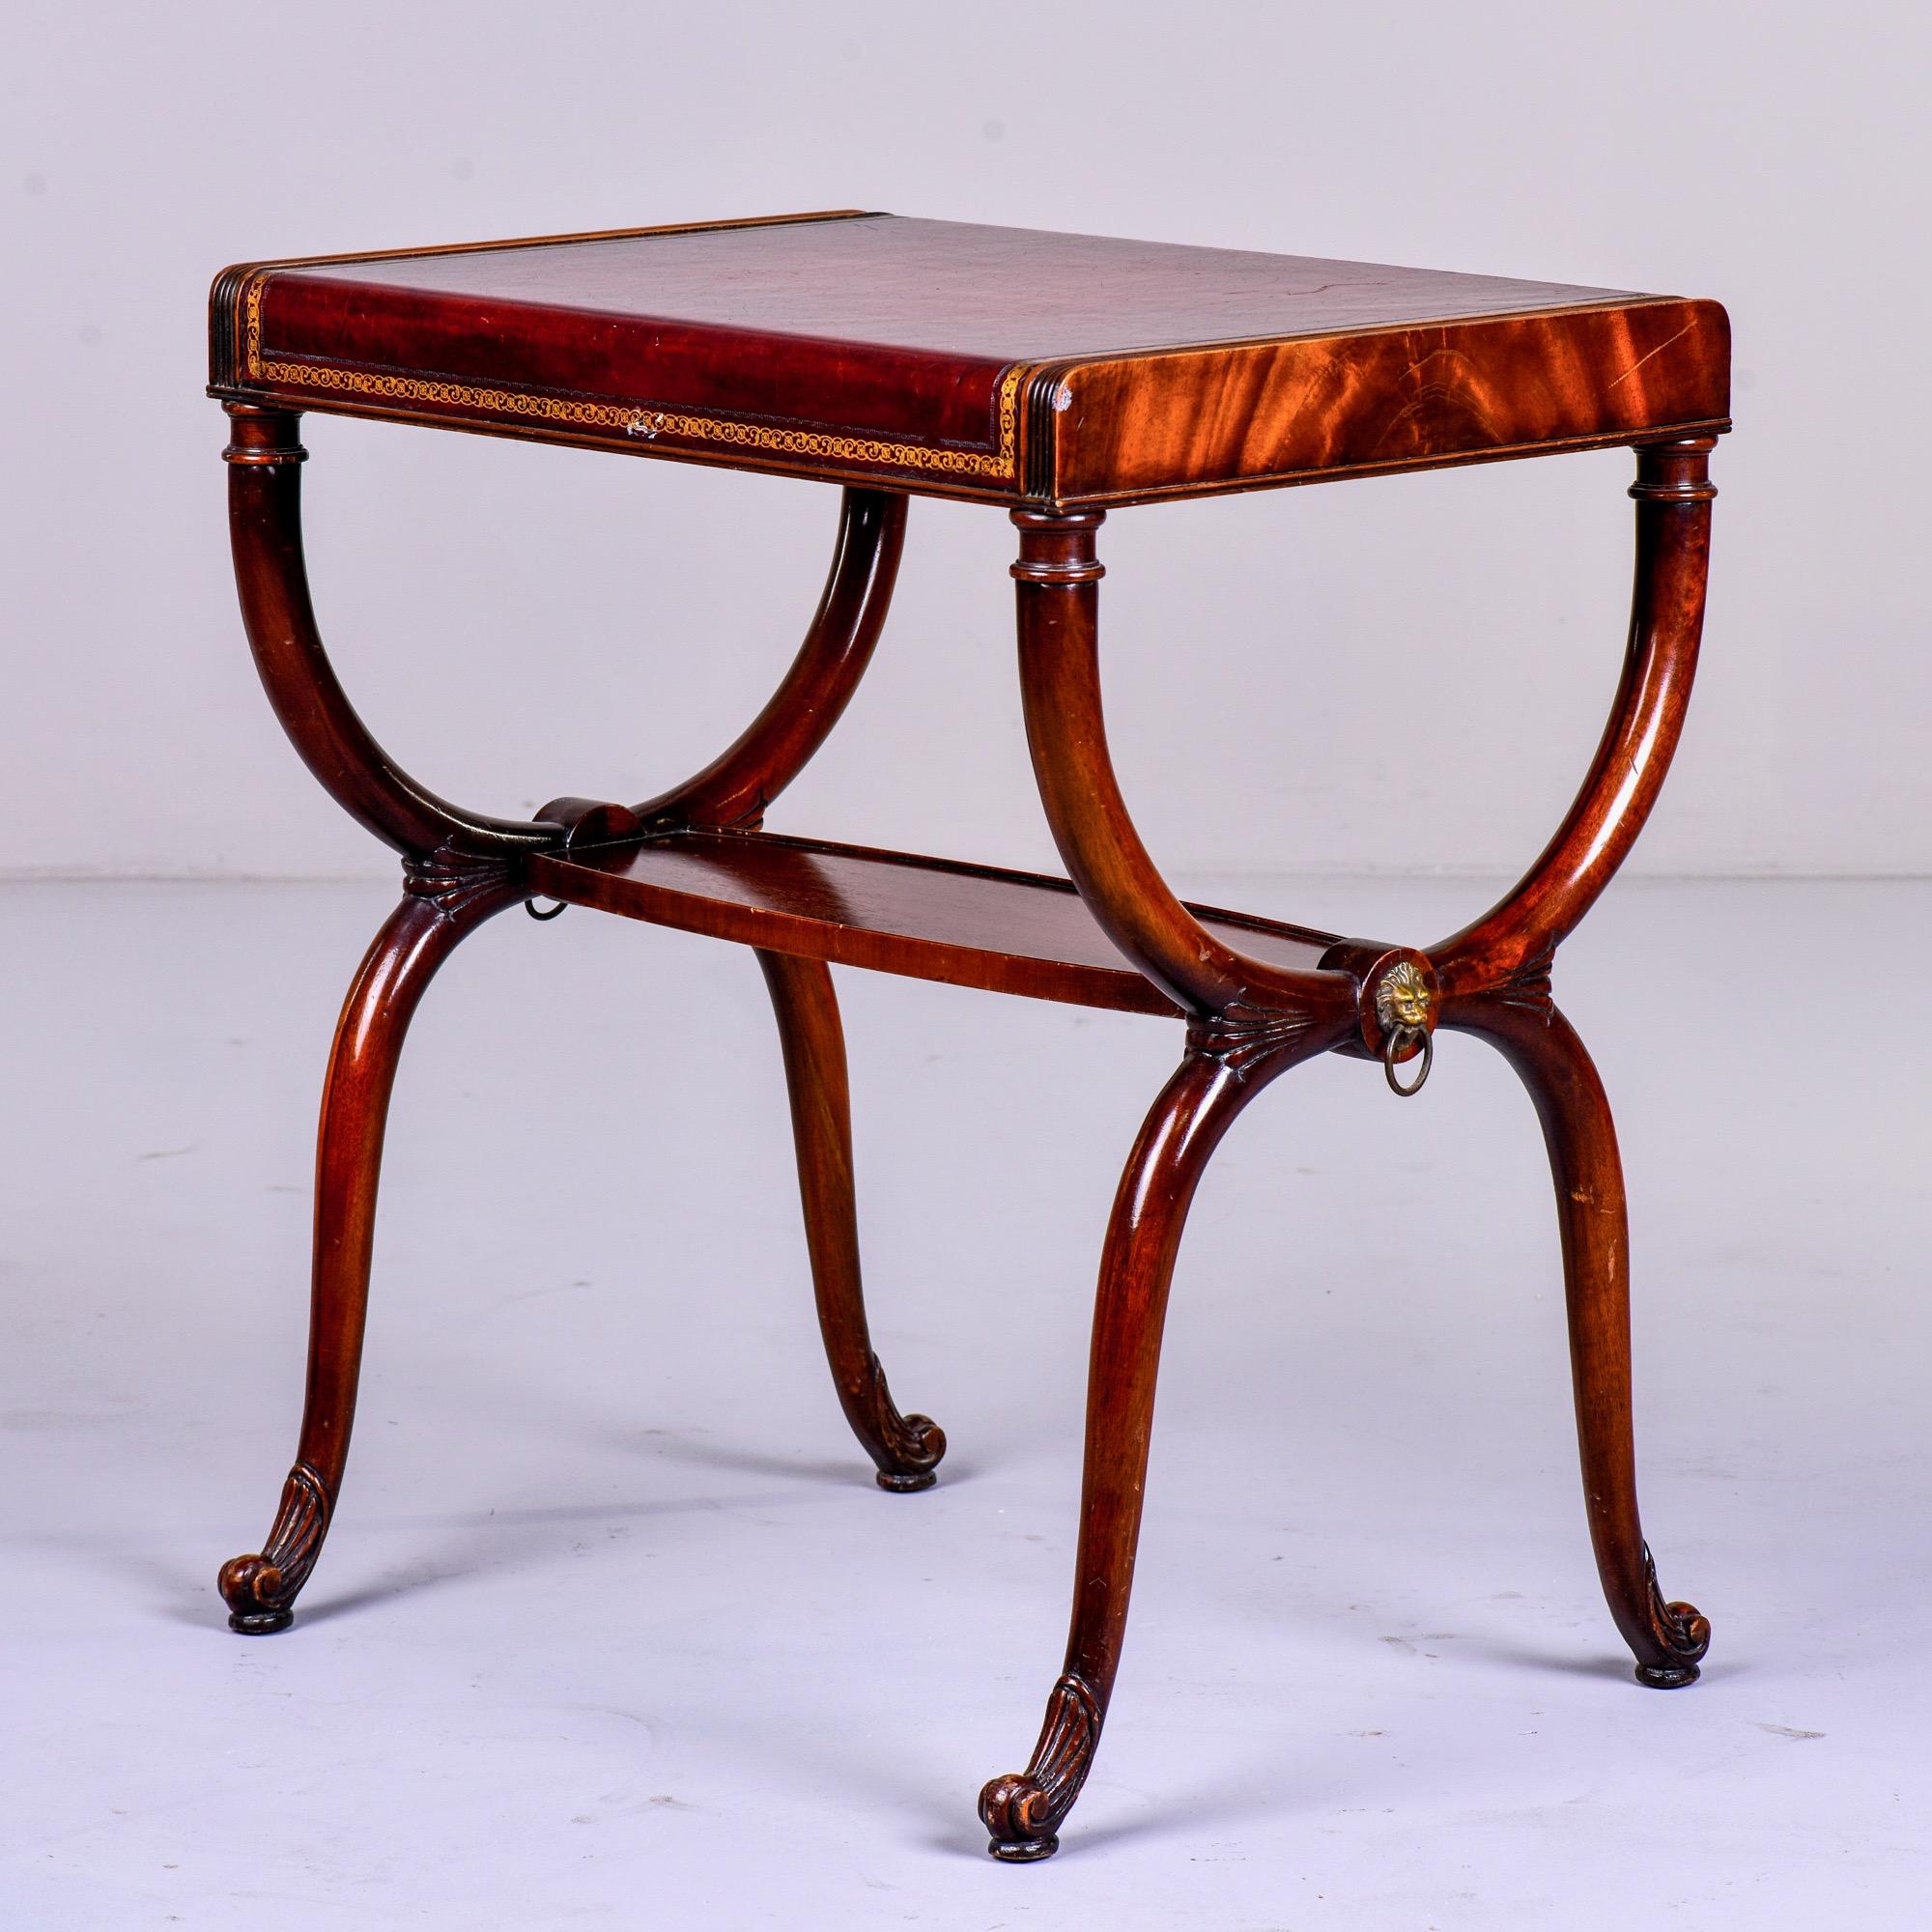 American English Regency Style Side Table with Tooled Red Leather Top